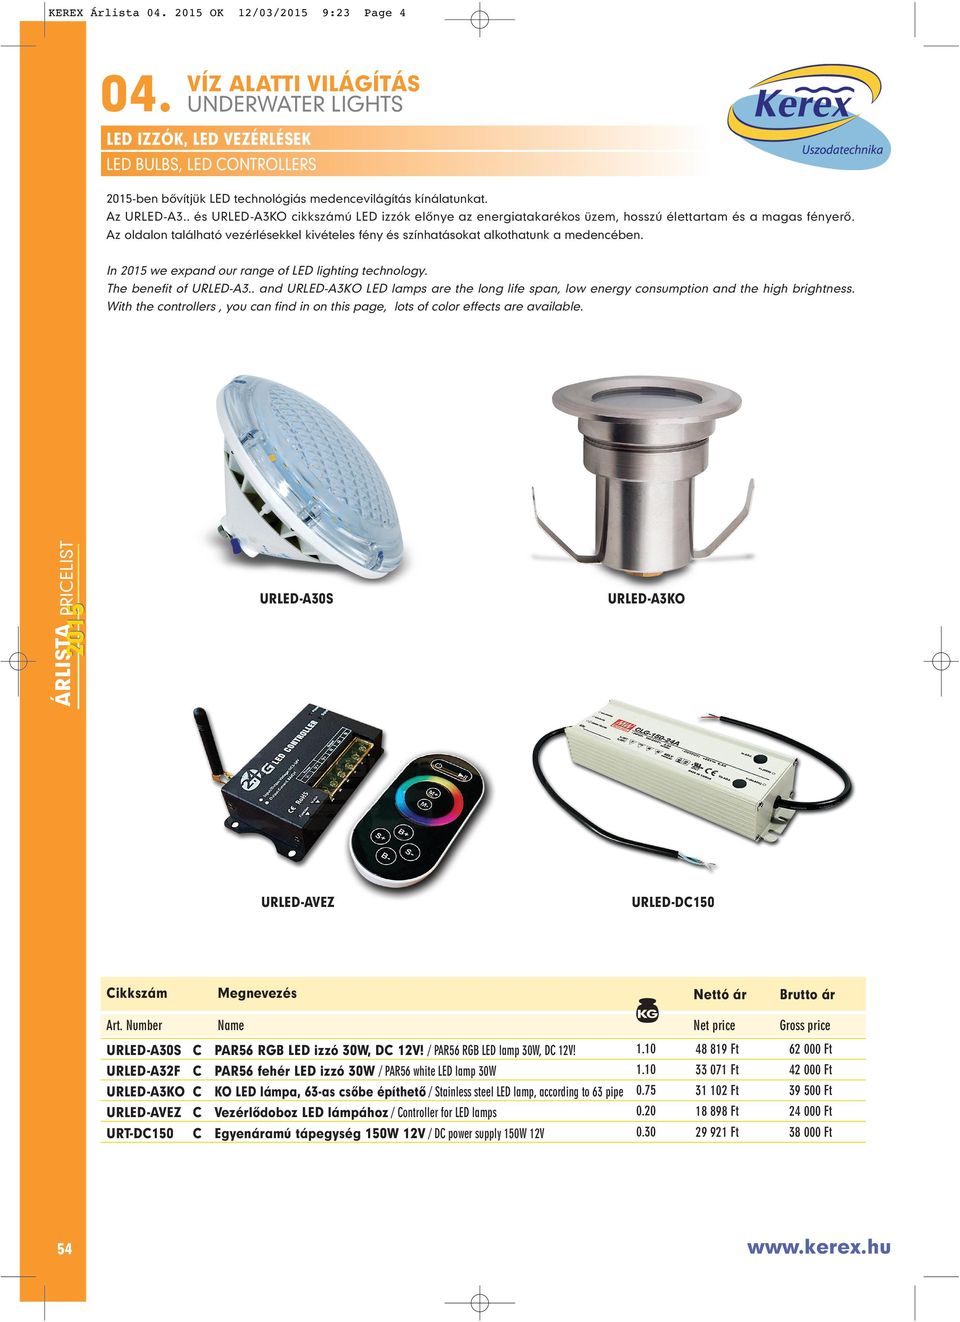 In we expand our range of LED lighting technology. The benefit of URLED-3.. and URLED-3KO LED lamps are the long life span, low energy consumption and the high brightness.